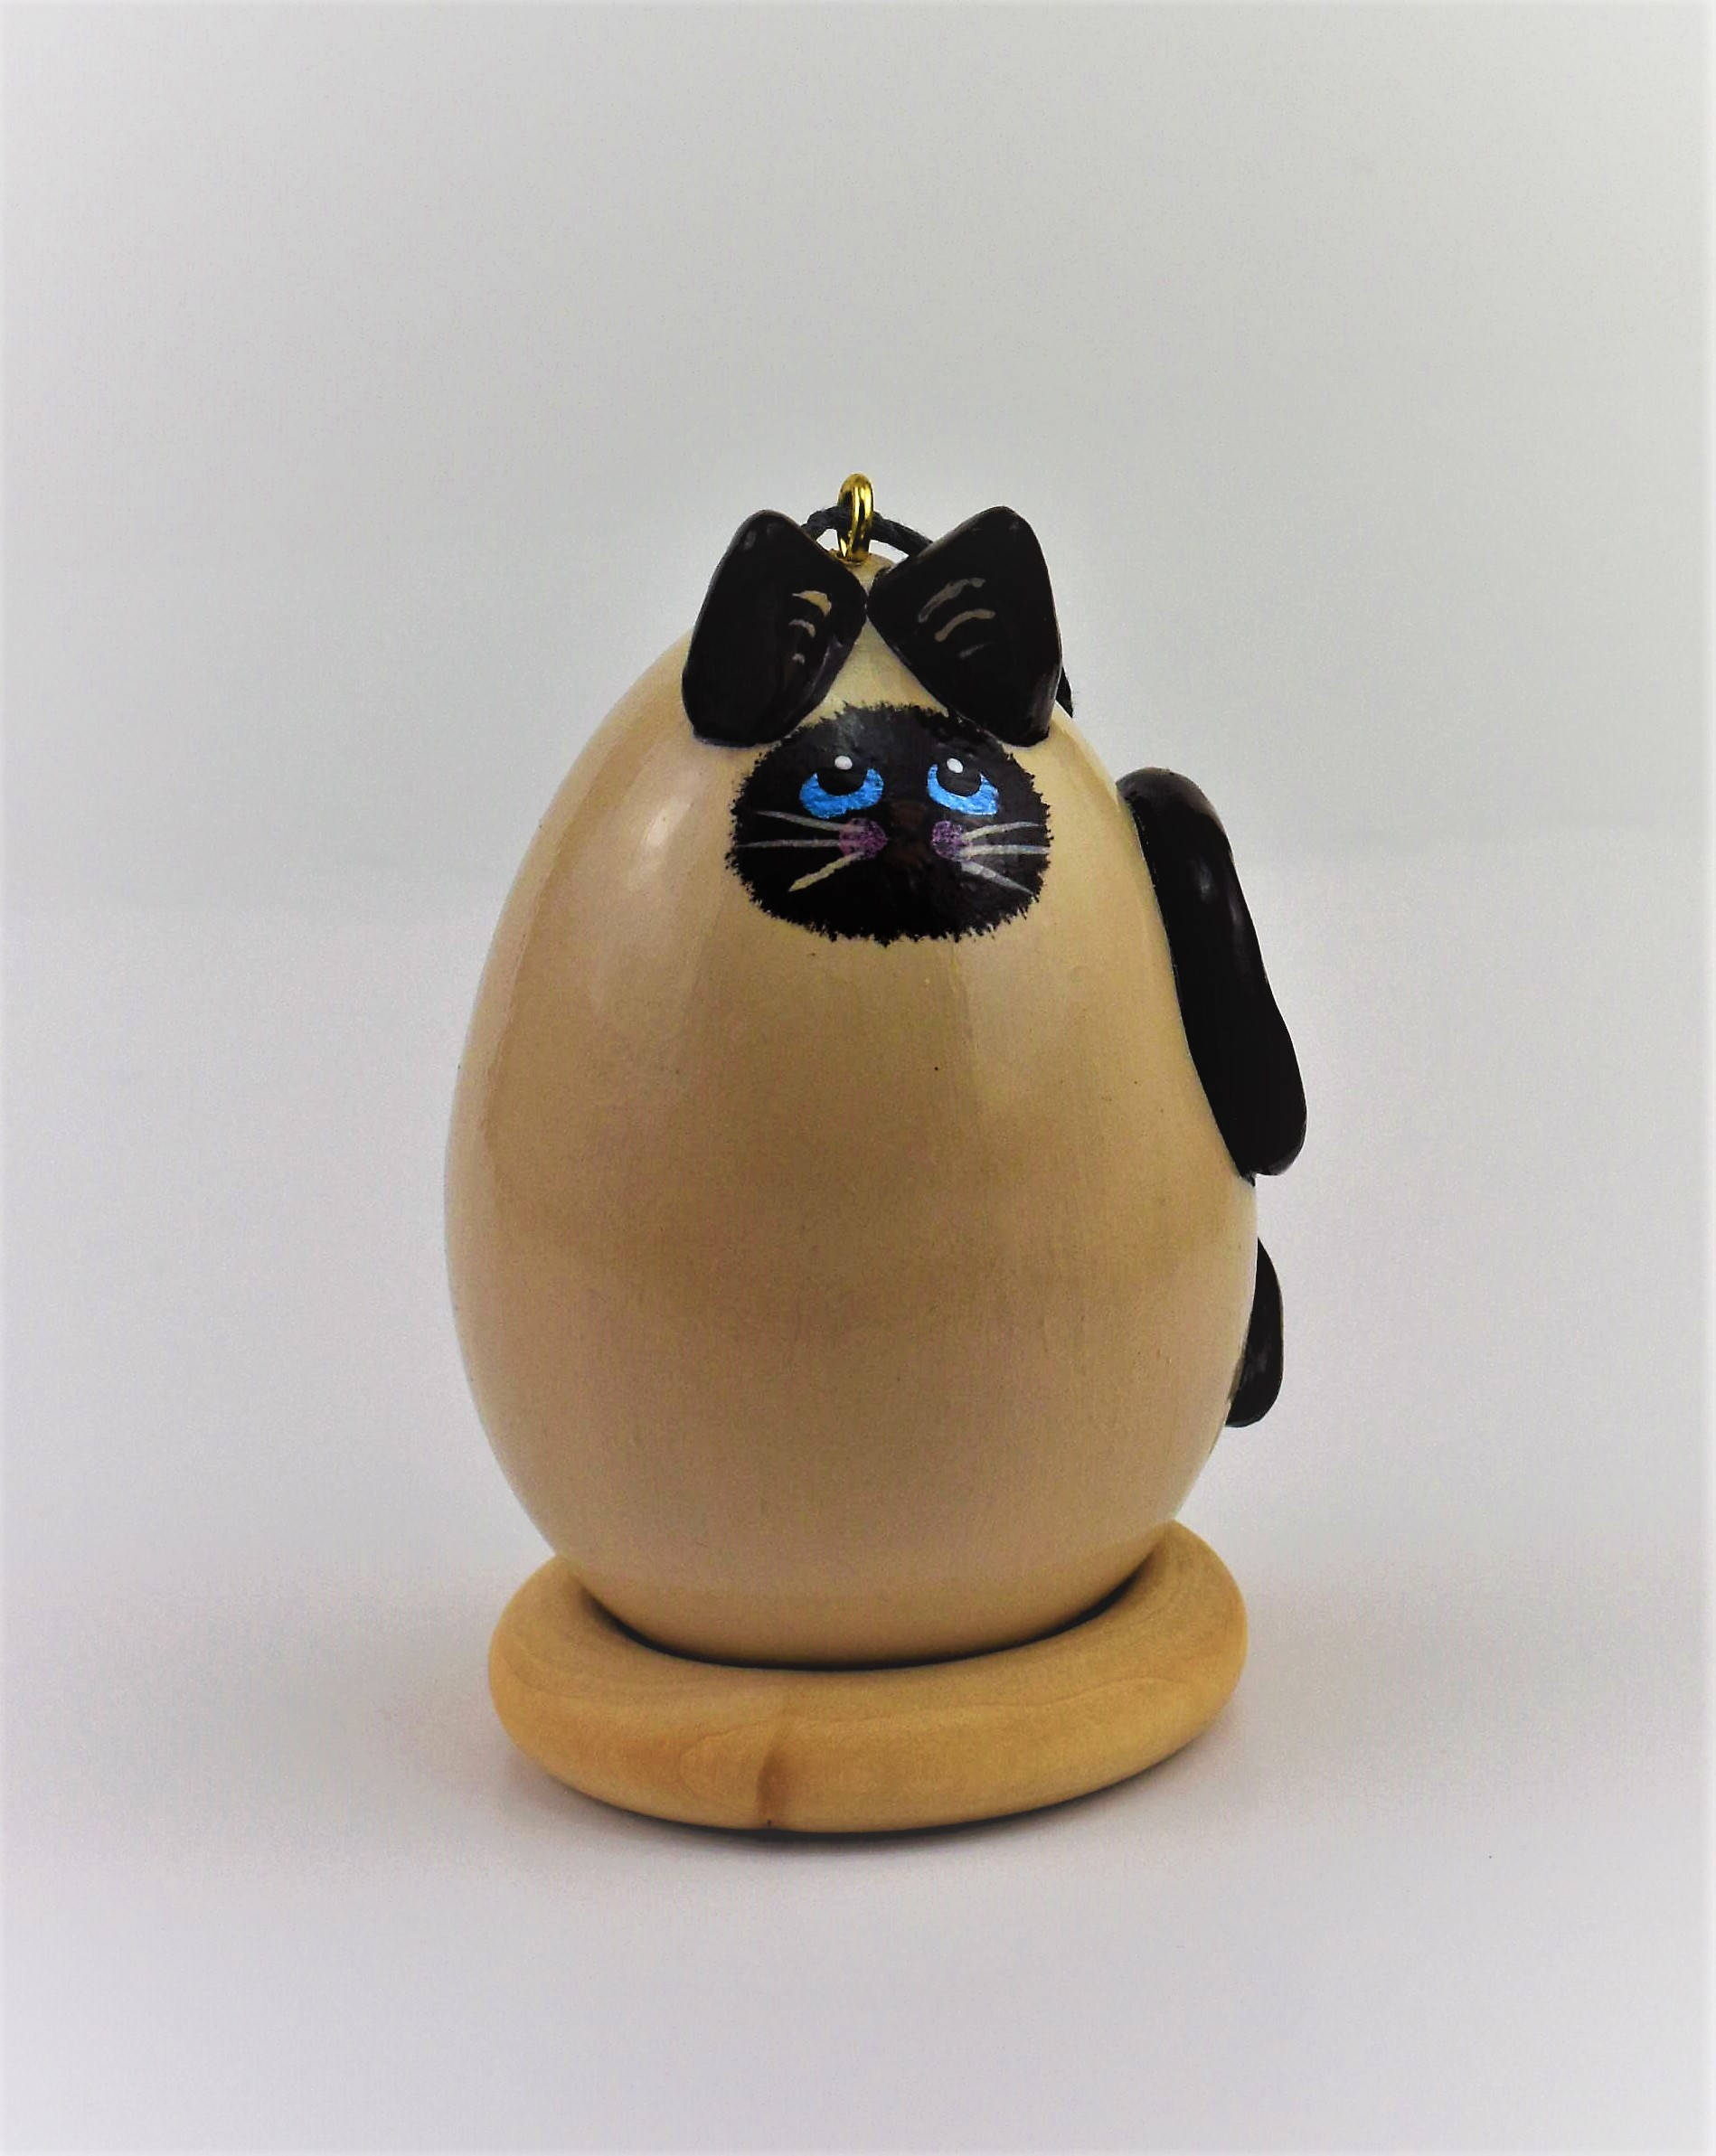 Siamese Cat Gourd Art Hand painted OOAK Christmas Ornament Blue Eyes Curled Tail Siamese Points Cat Lover Gift - Gourdaments